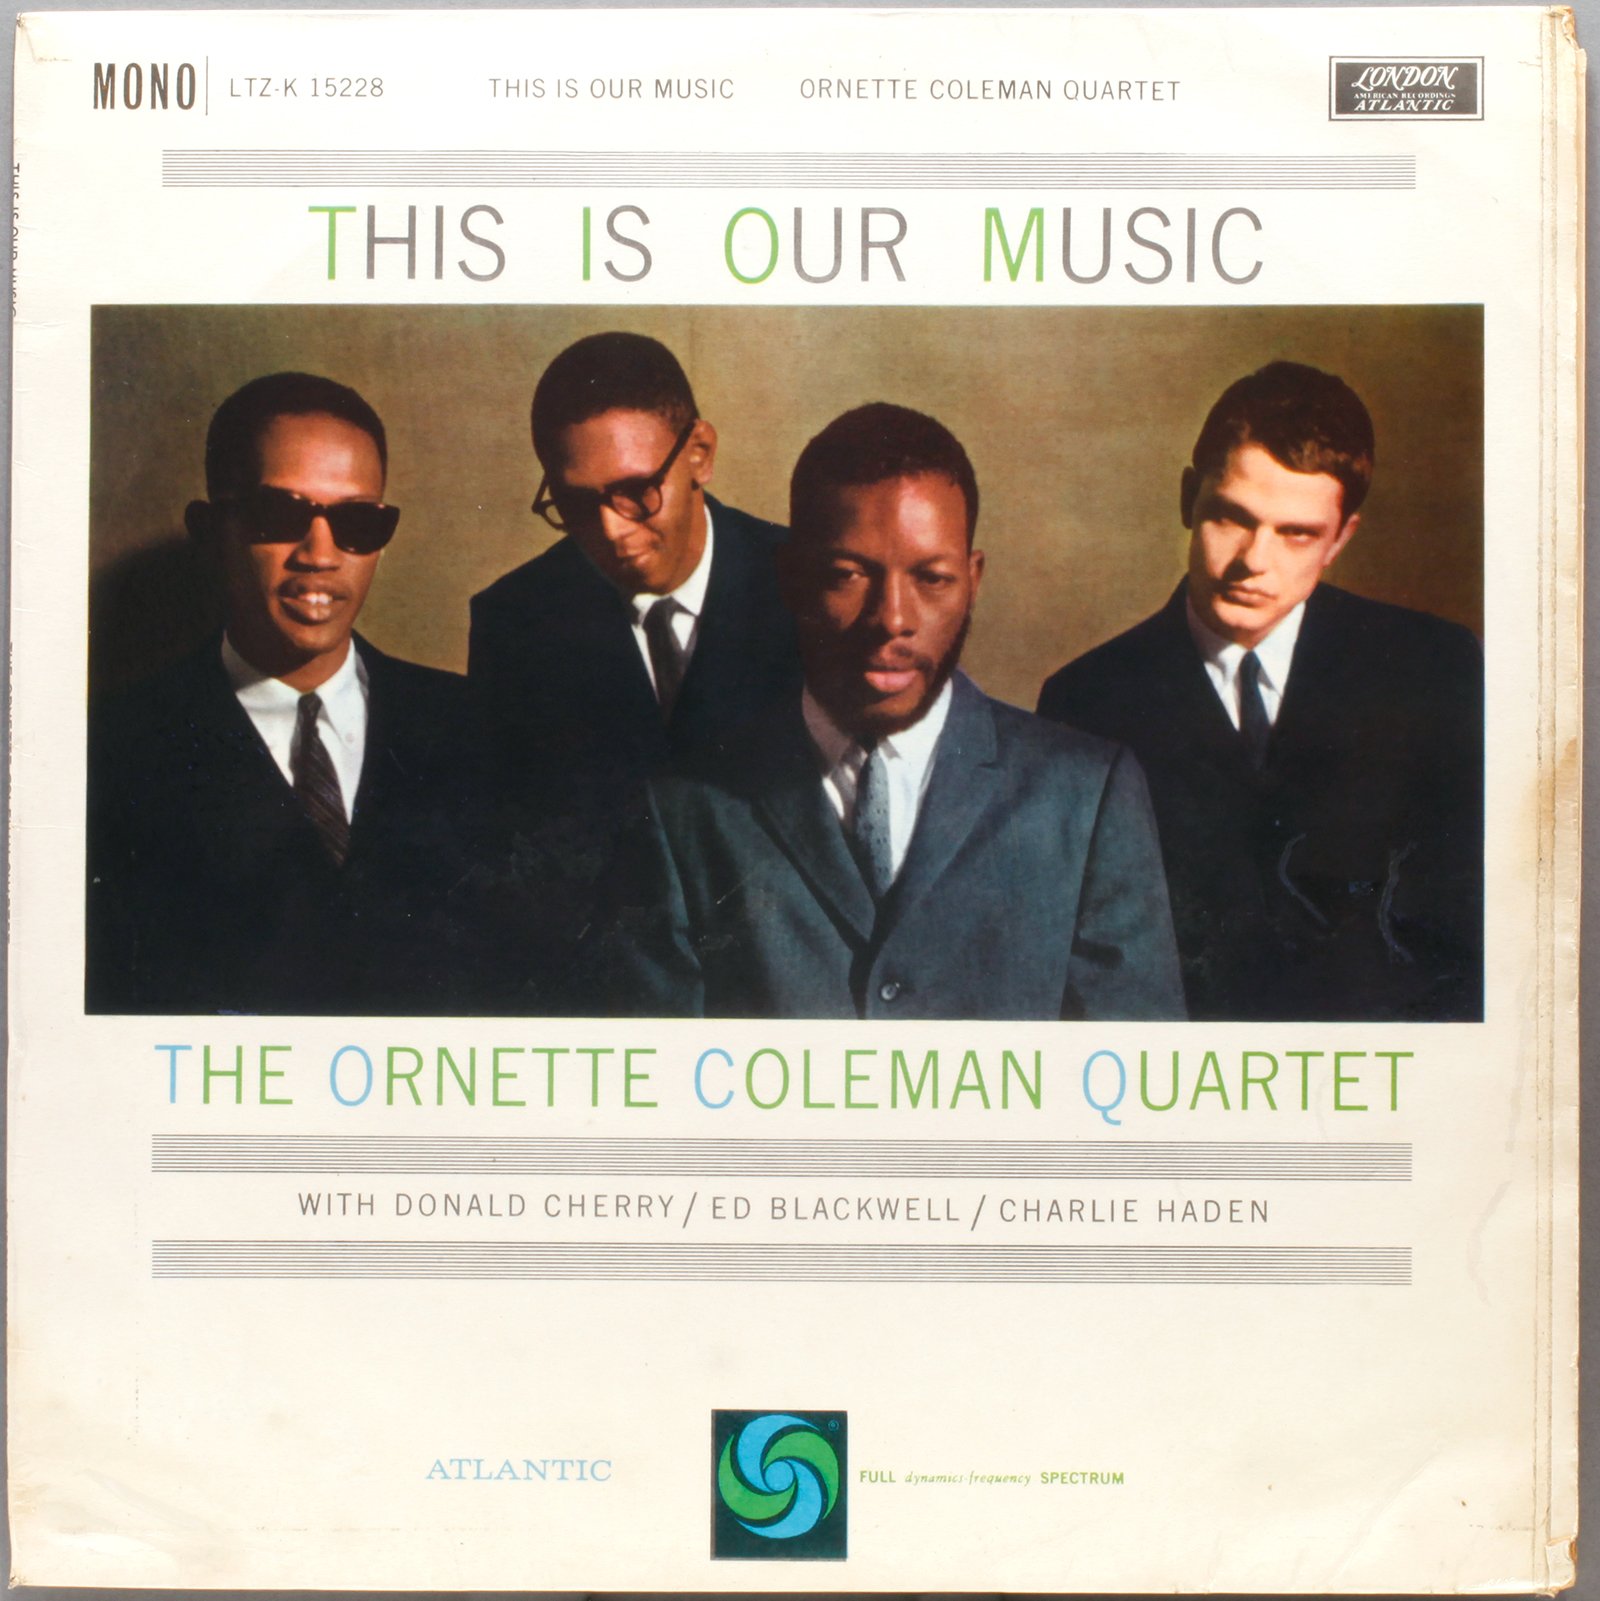 Ornette Coleman - This Is Our Music [1960] Atlantic. The coolest album cover ever! Happy Birthday Sir 